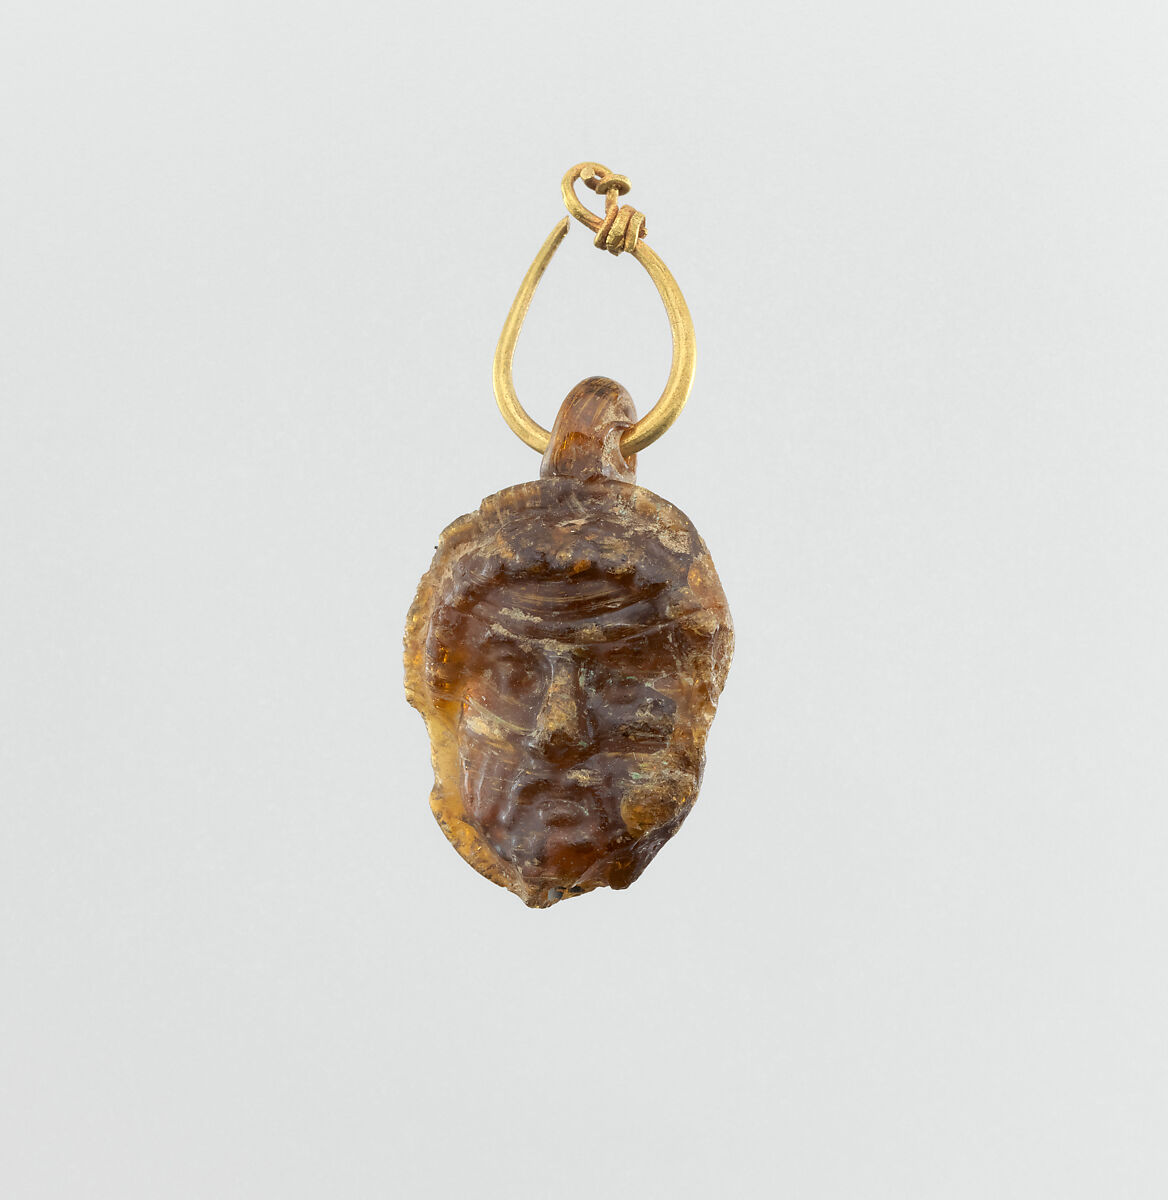 Glass double-headed pendant with gold hoop, Gold, glass, Punic, Western Mediterranean 